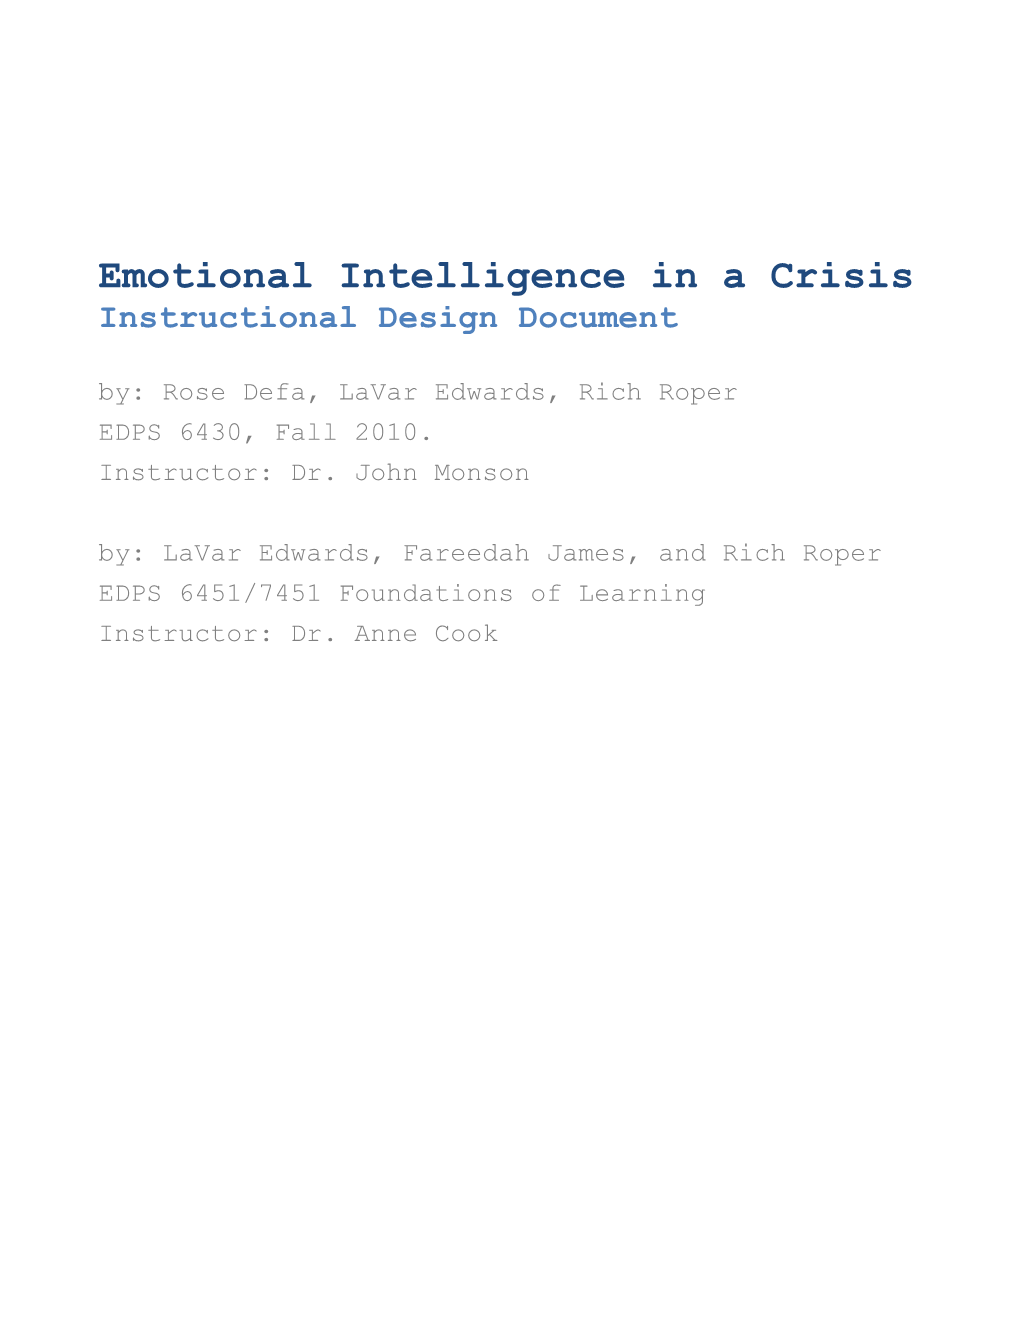 Emotional Intelligence in a Crisis